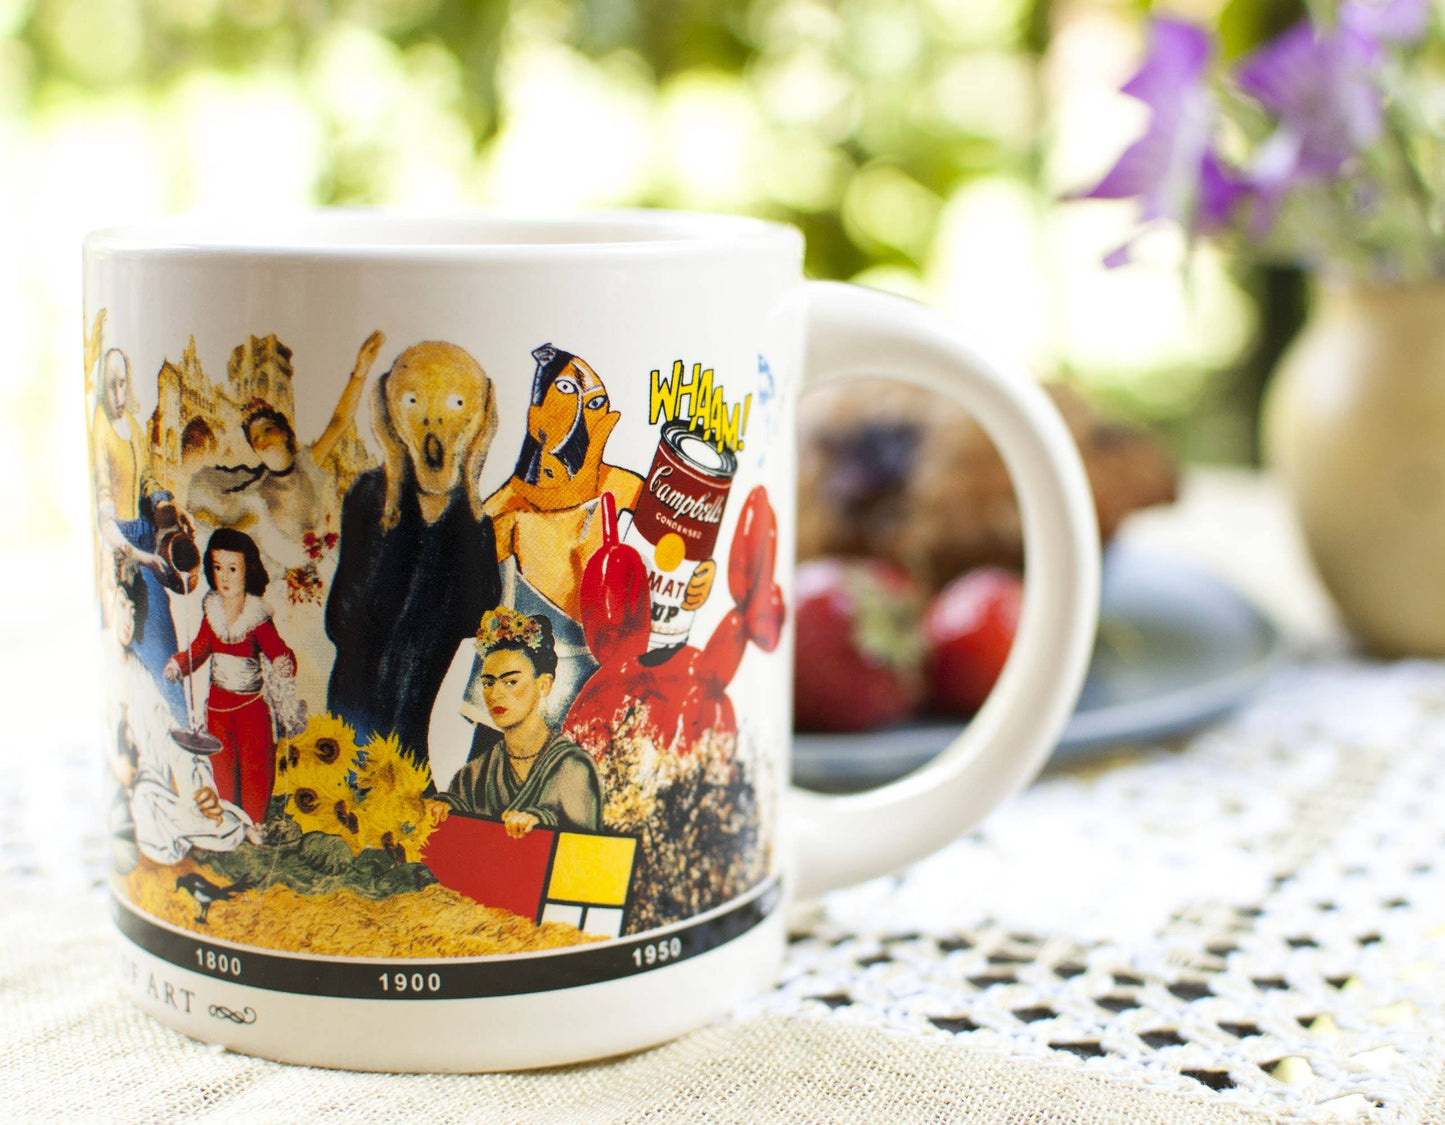 Brief History of Art Coffee Mug from Unemployed Philosophers Guild